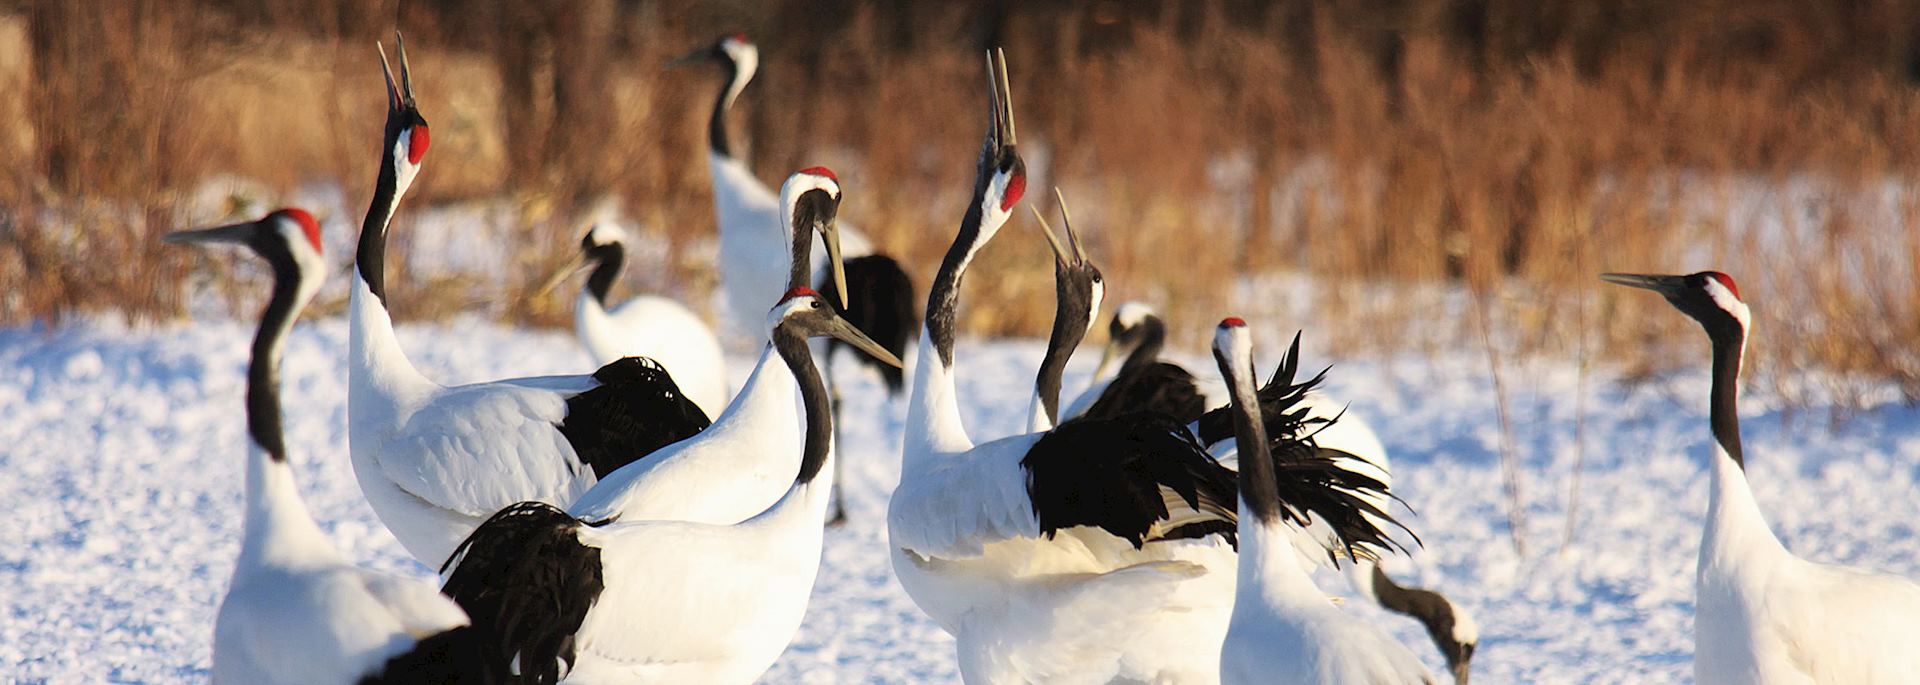 Red Crested Cranes in Kushiro